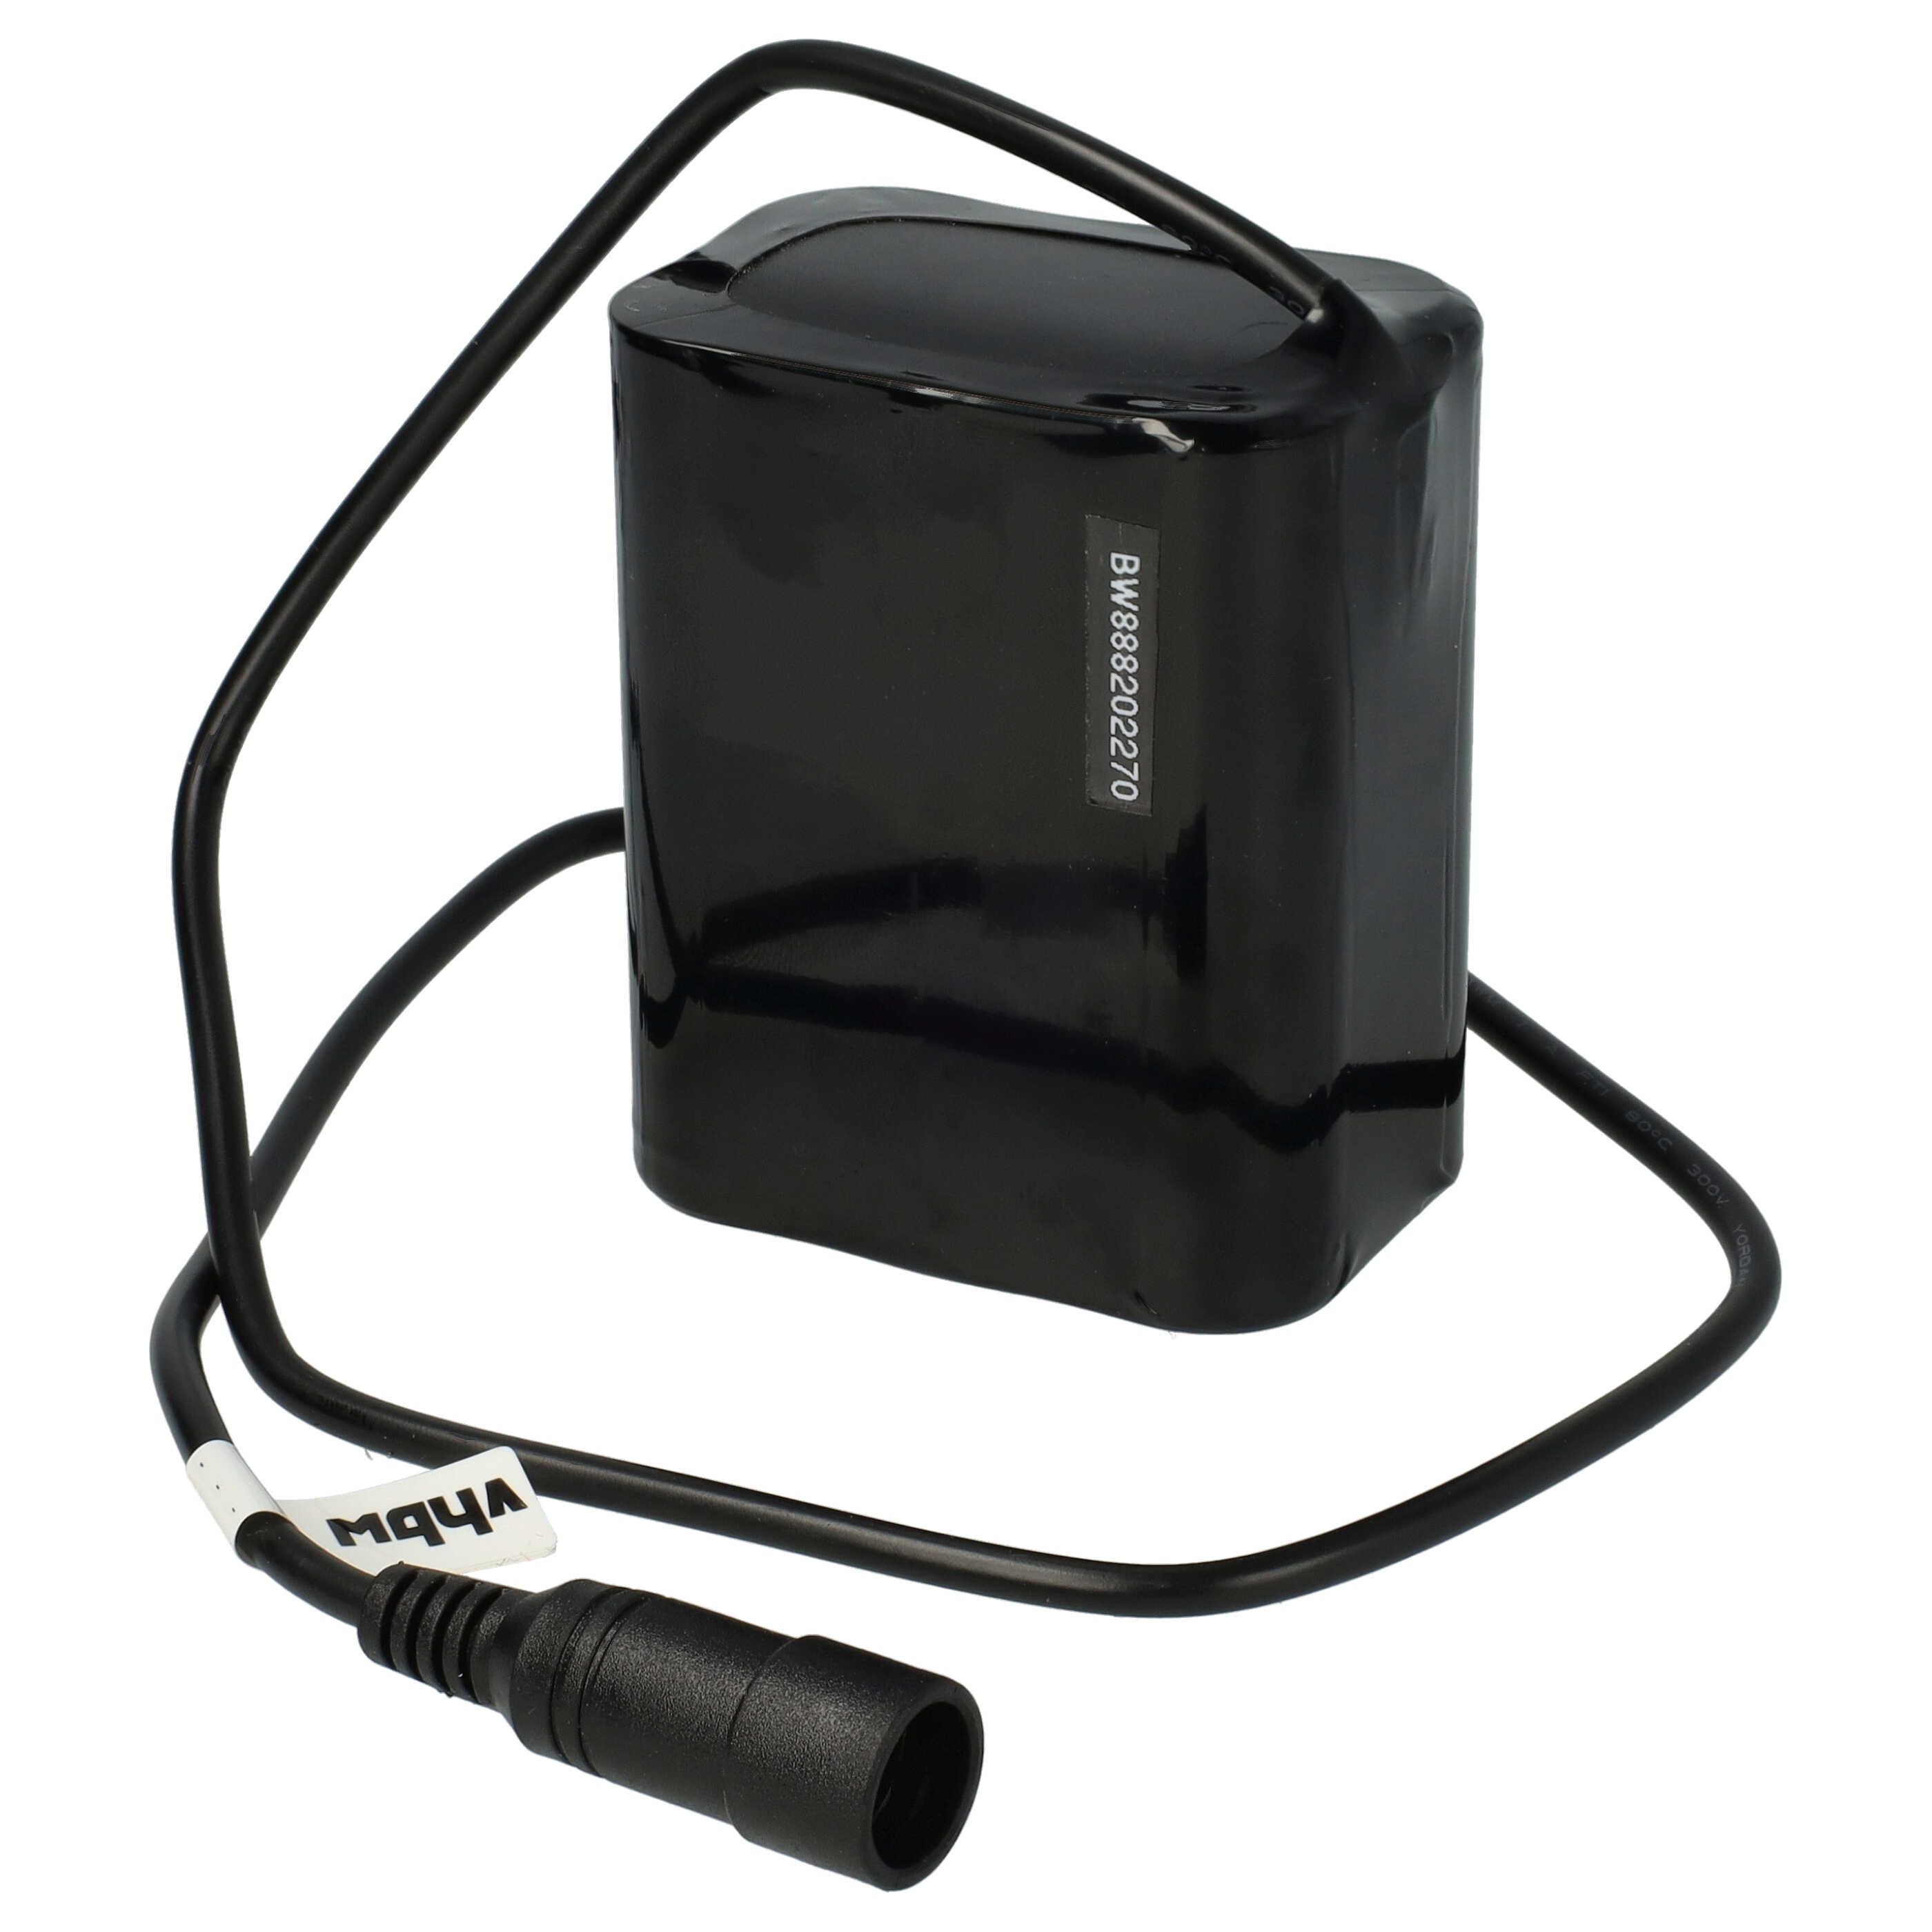 Li-Ion-battery pack- 9000mAh 8.4V + Charger - for bicycle lamp light